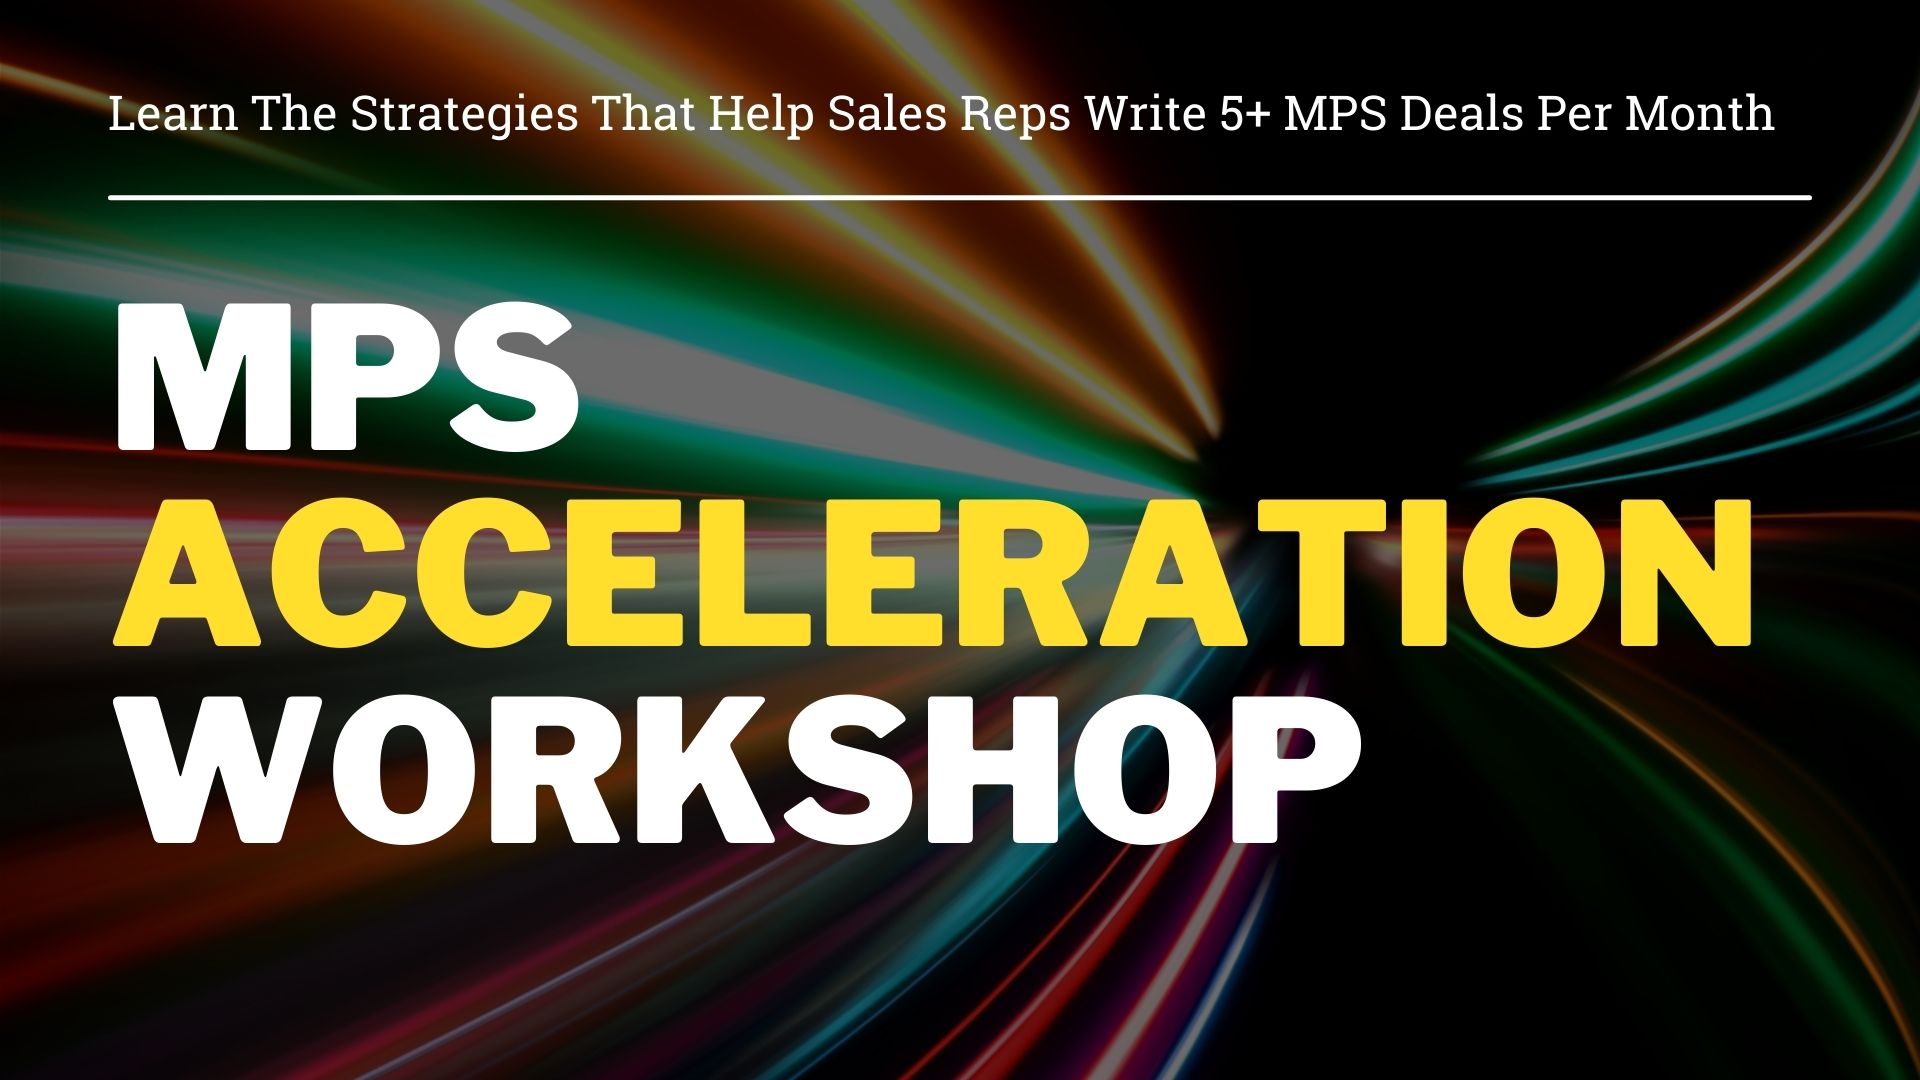 MPS Acceleration Workshop by Modern Sales Training